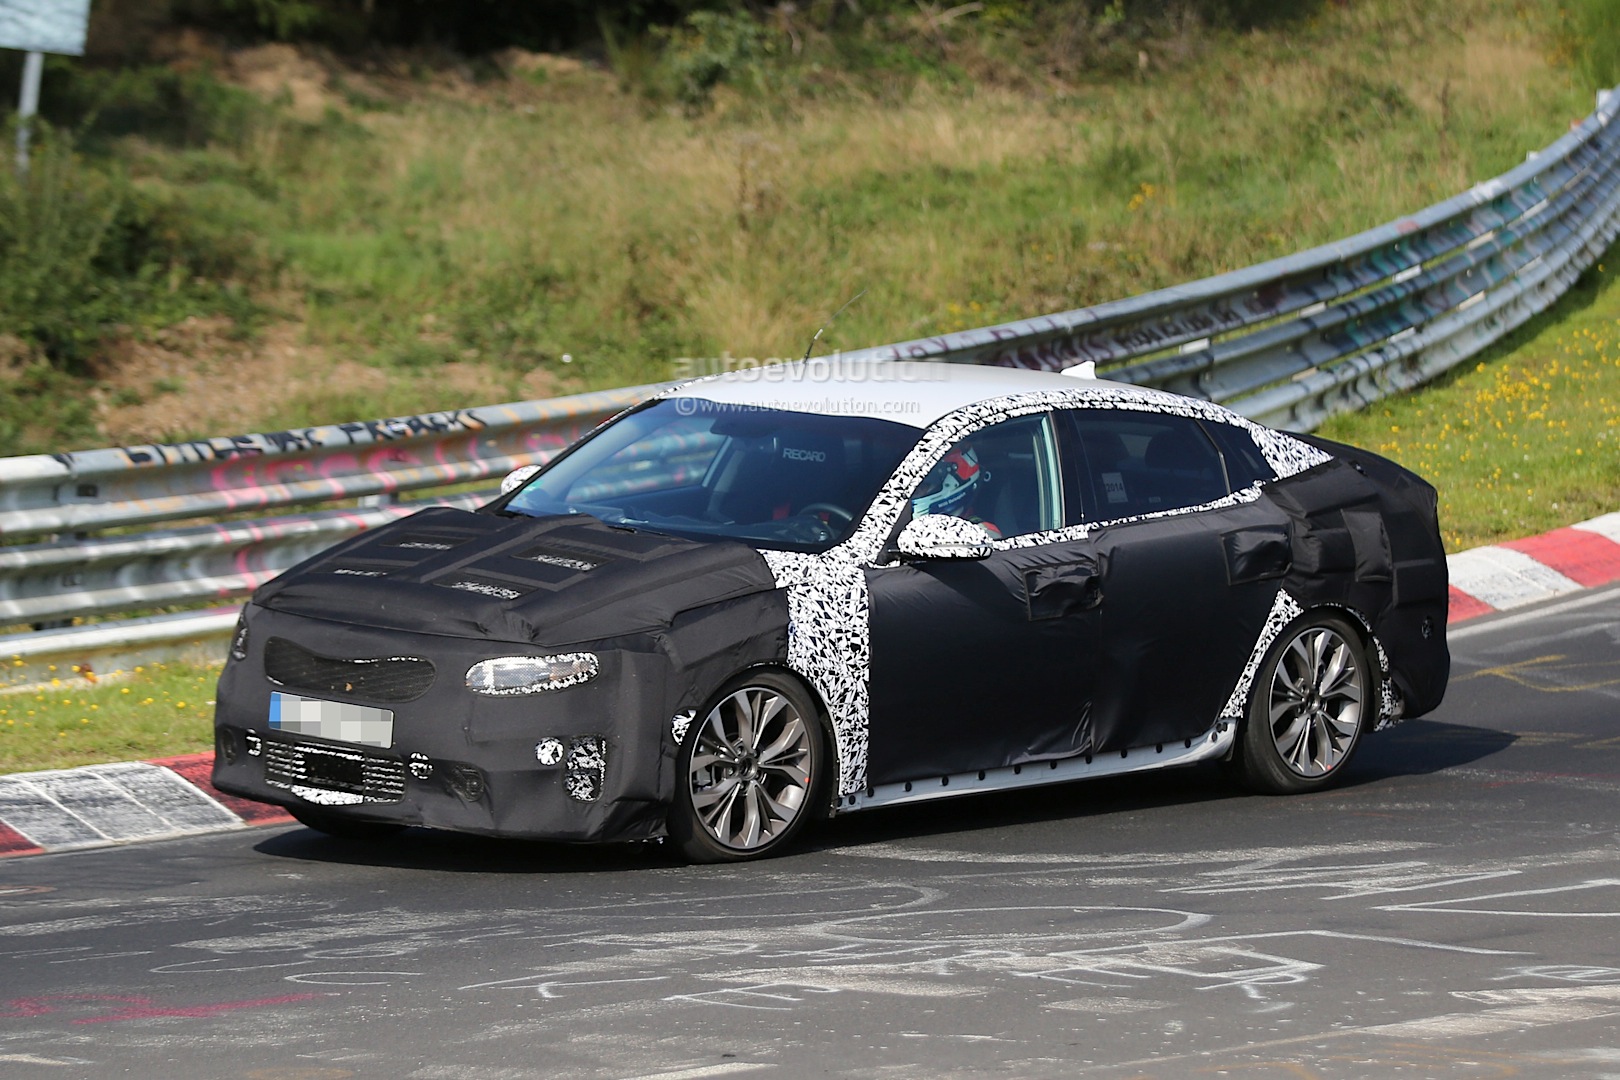 all-new-2016-kia-optima-spied-for-the-first-time-including-the-interior_9